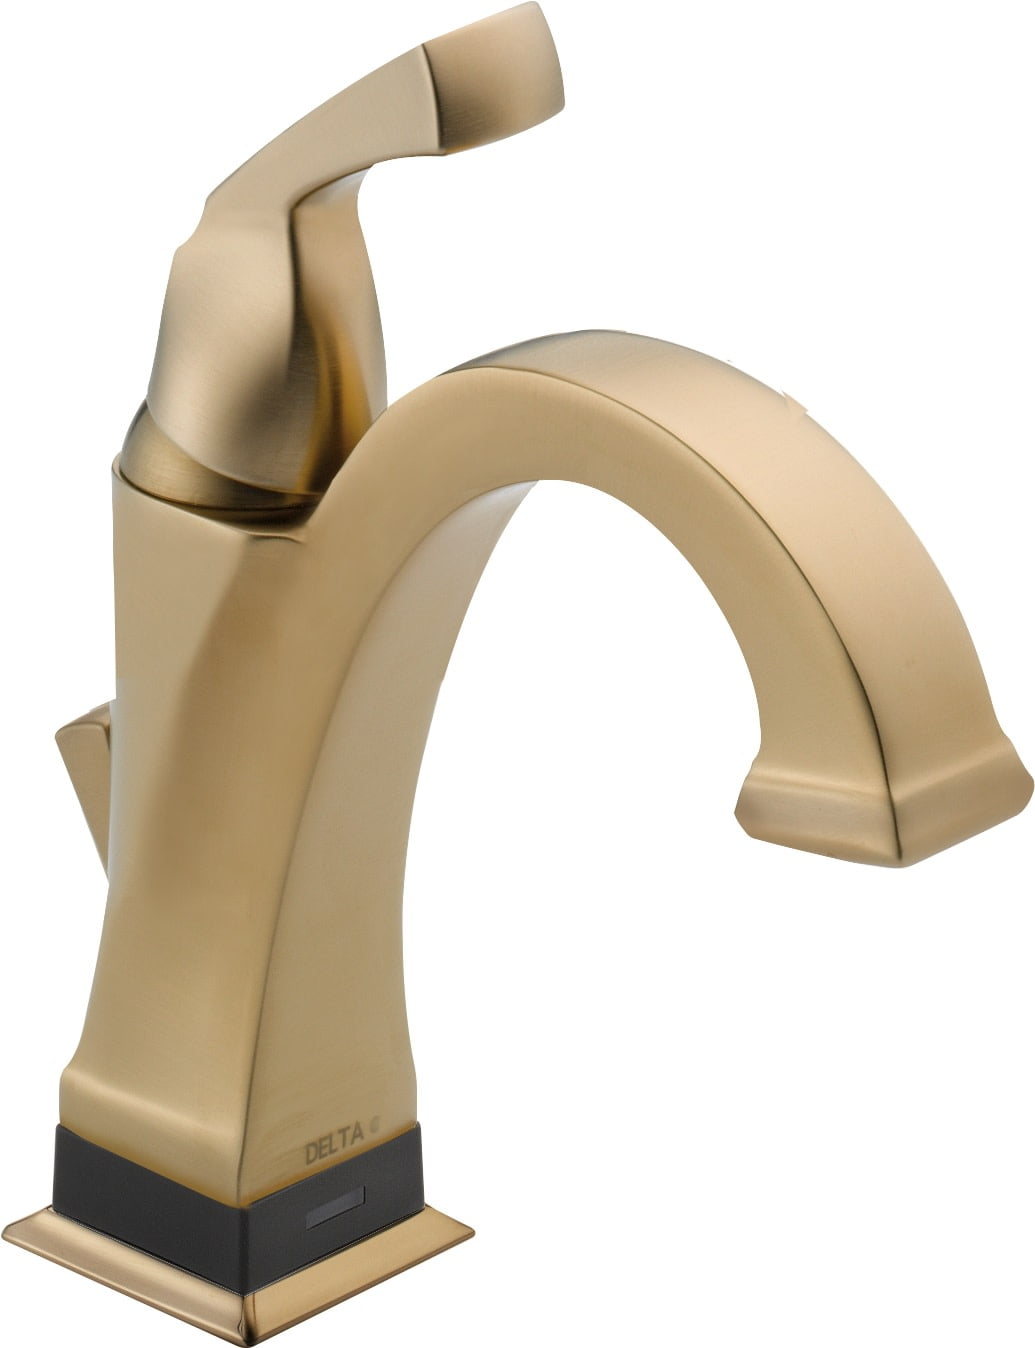 Delta Dryden Single Handle Bathroom Faucet With Touch2o Xt